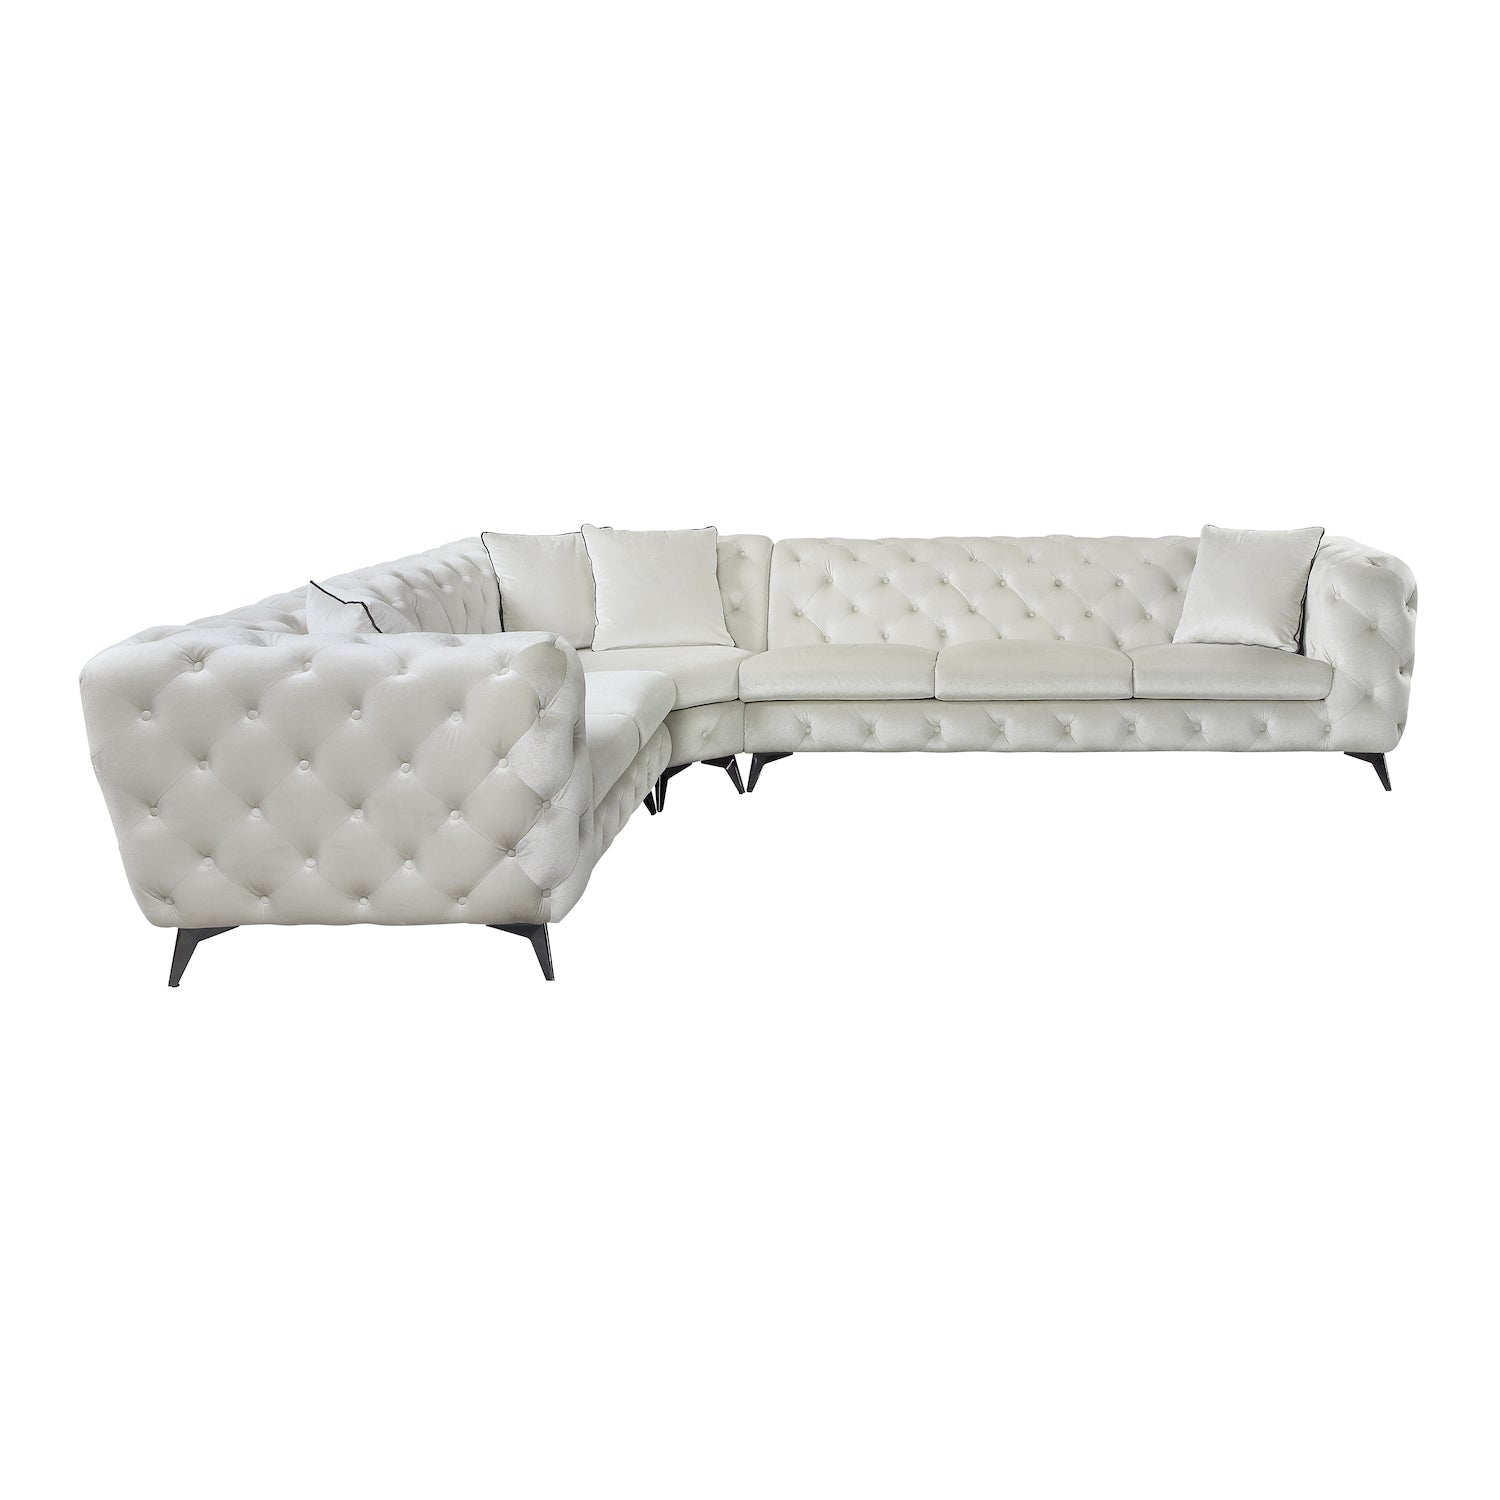 Atronia 133" Modern Tufted Sectional - Beige